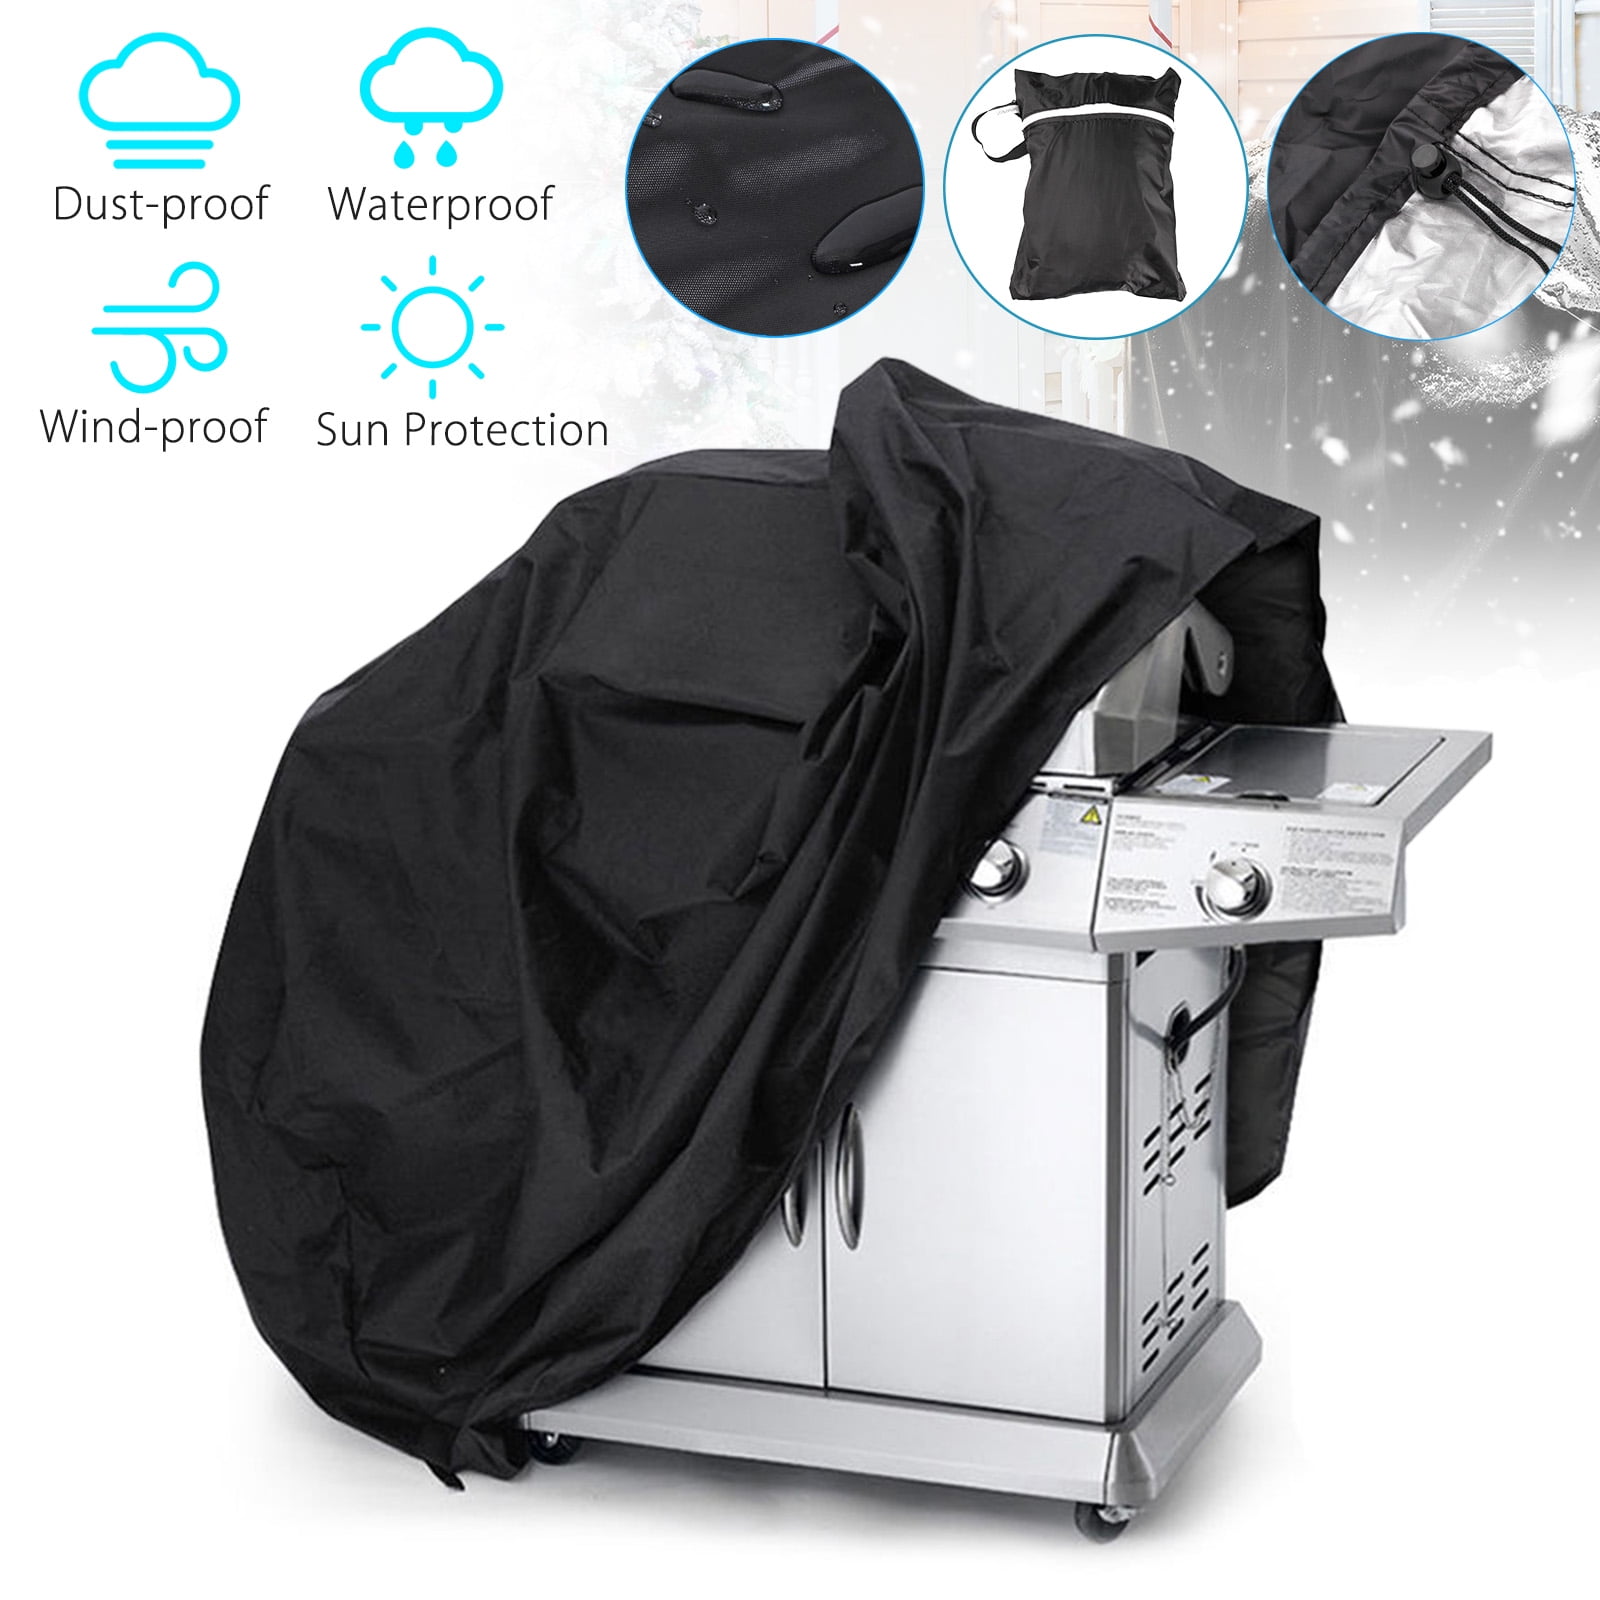 bbq cover heavy duty waterproof rain gas barbeque grill garden protector s m l ✅ 